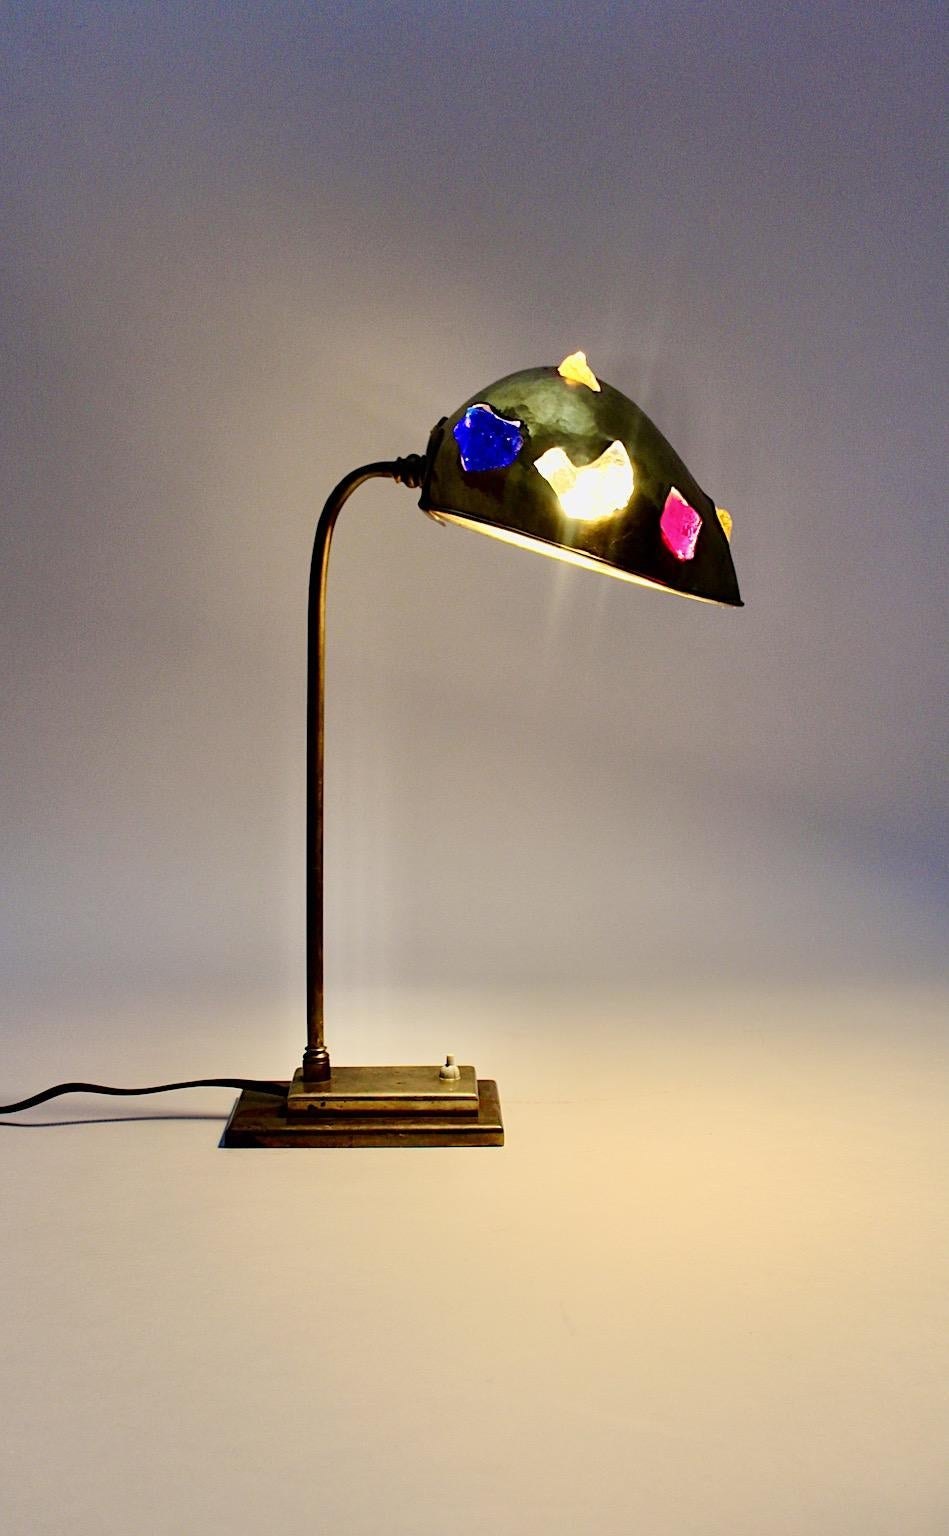 Mid-Century Modern vintage table lamp from brass and various multicolored unpolished glass stones Austria 1950s.
While the outstanding table lamp shows beautifully hammered brass shade with various multicolored glass stones, the downer part